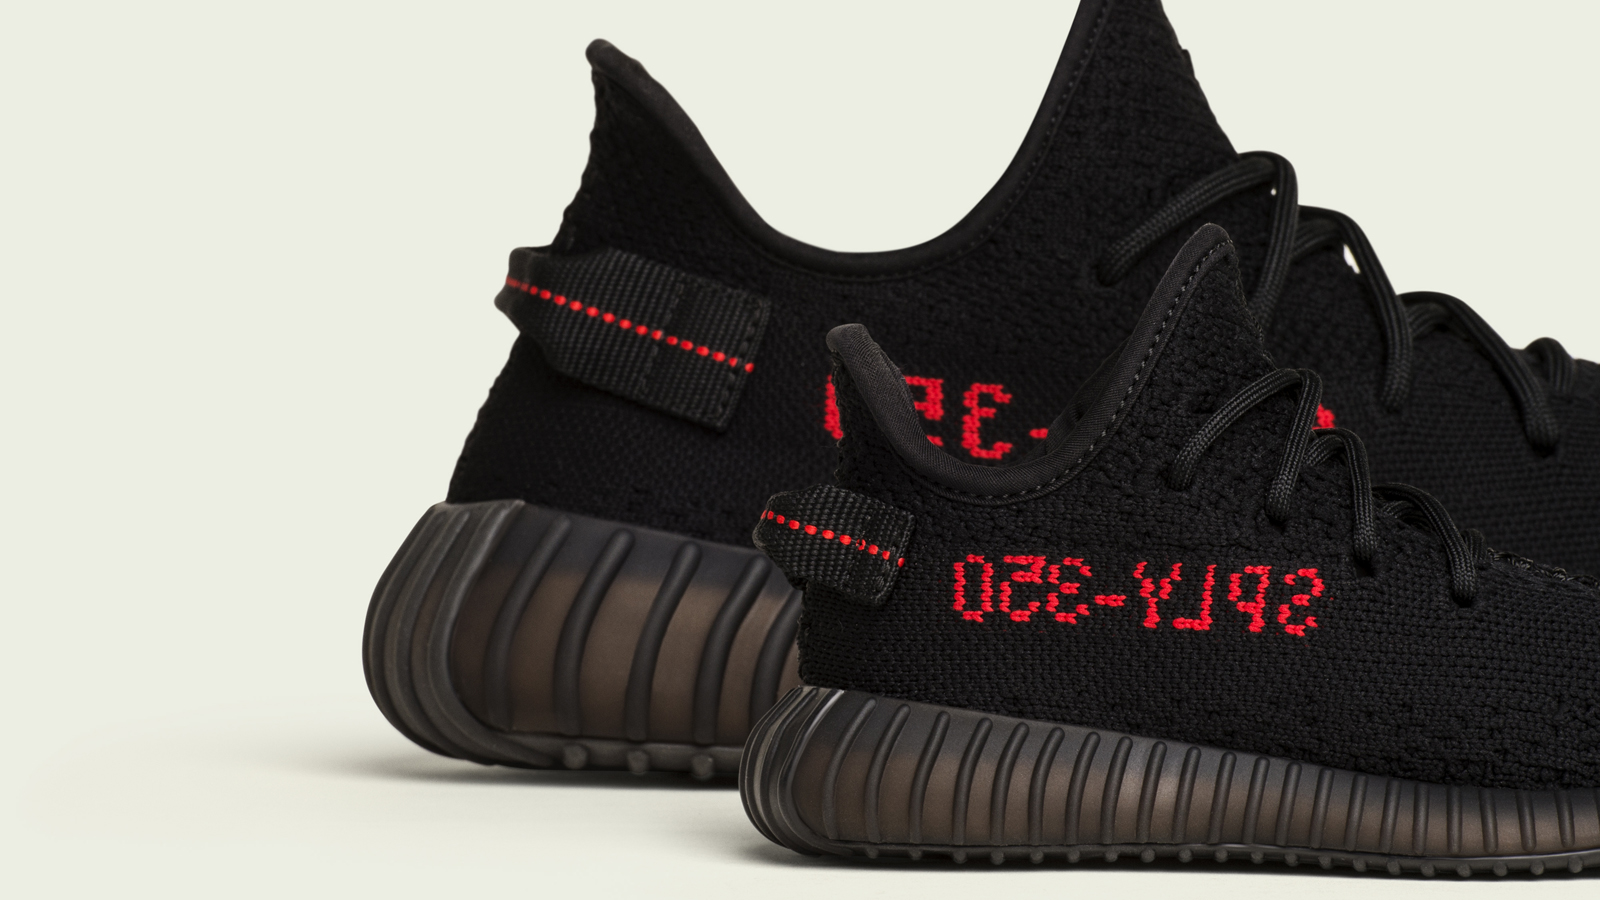 The Yeezy Boost 350 V2 In Black Static - Yeezy Popular Nike Shoes - HD Wallpaper 